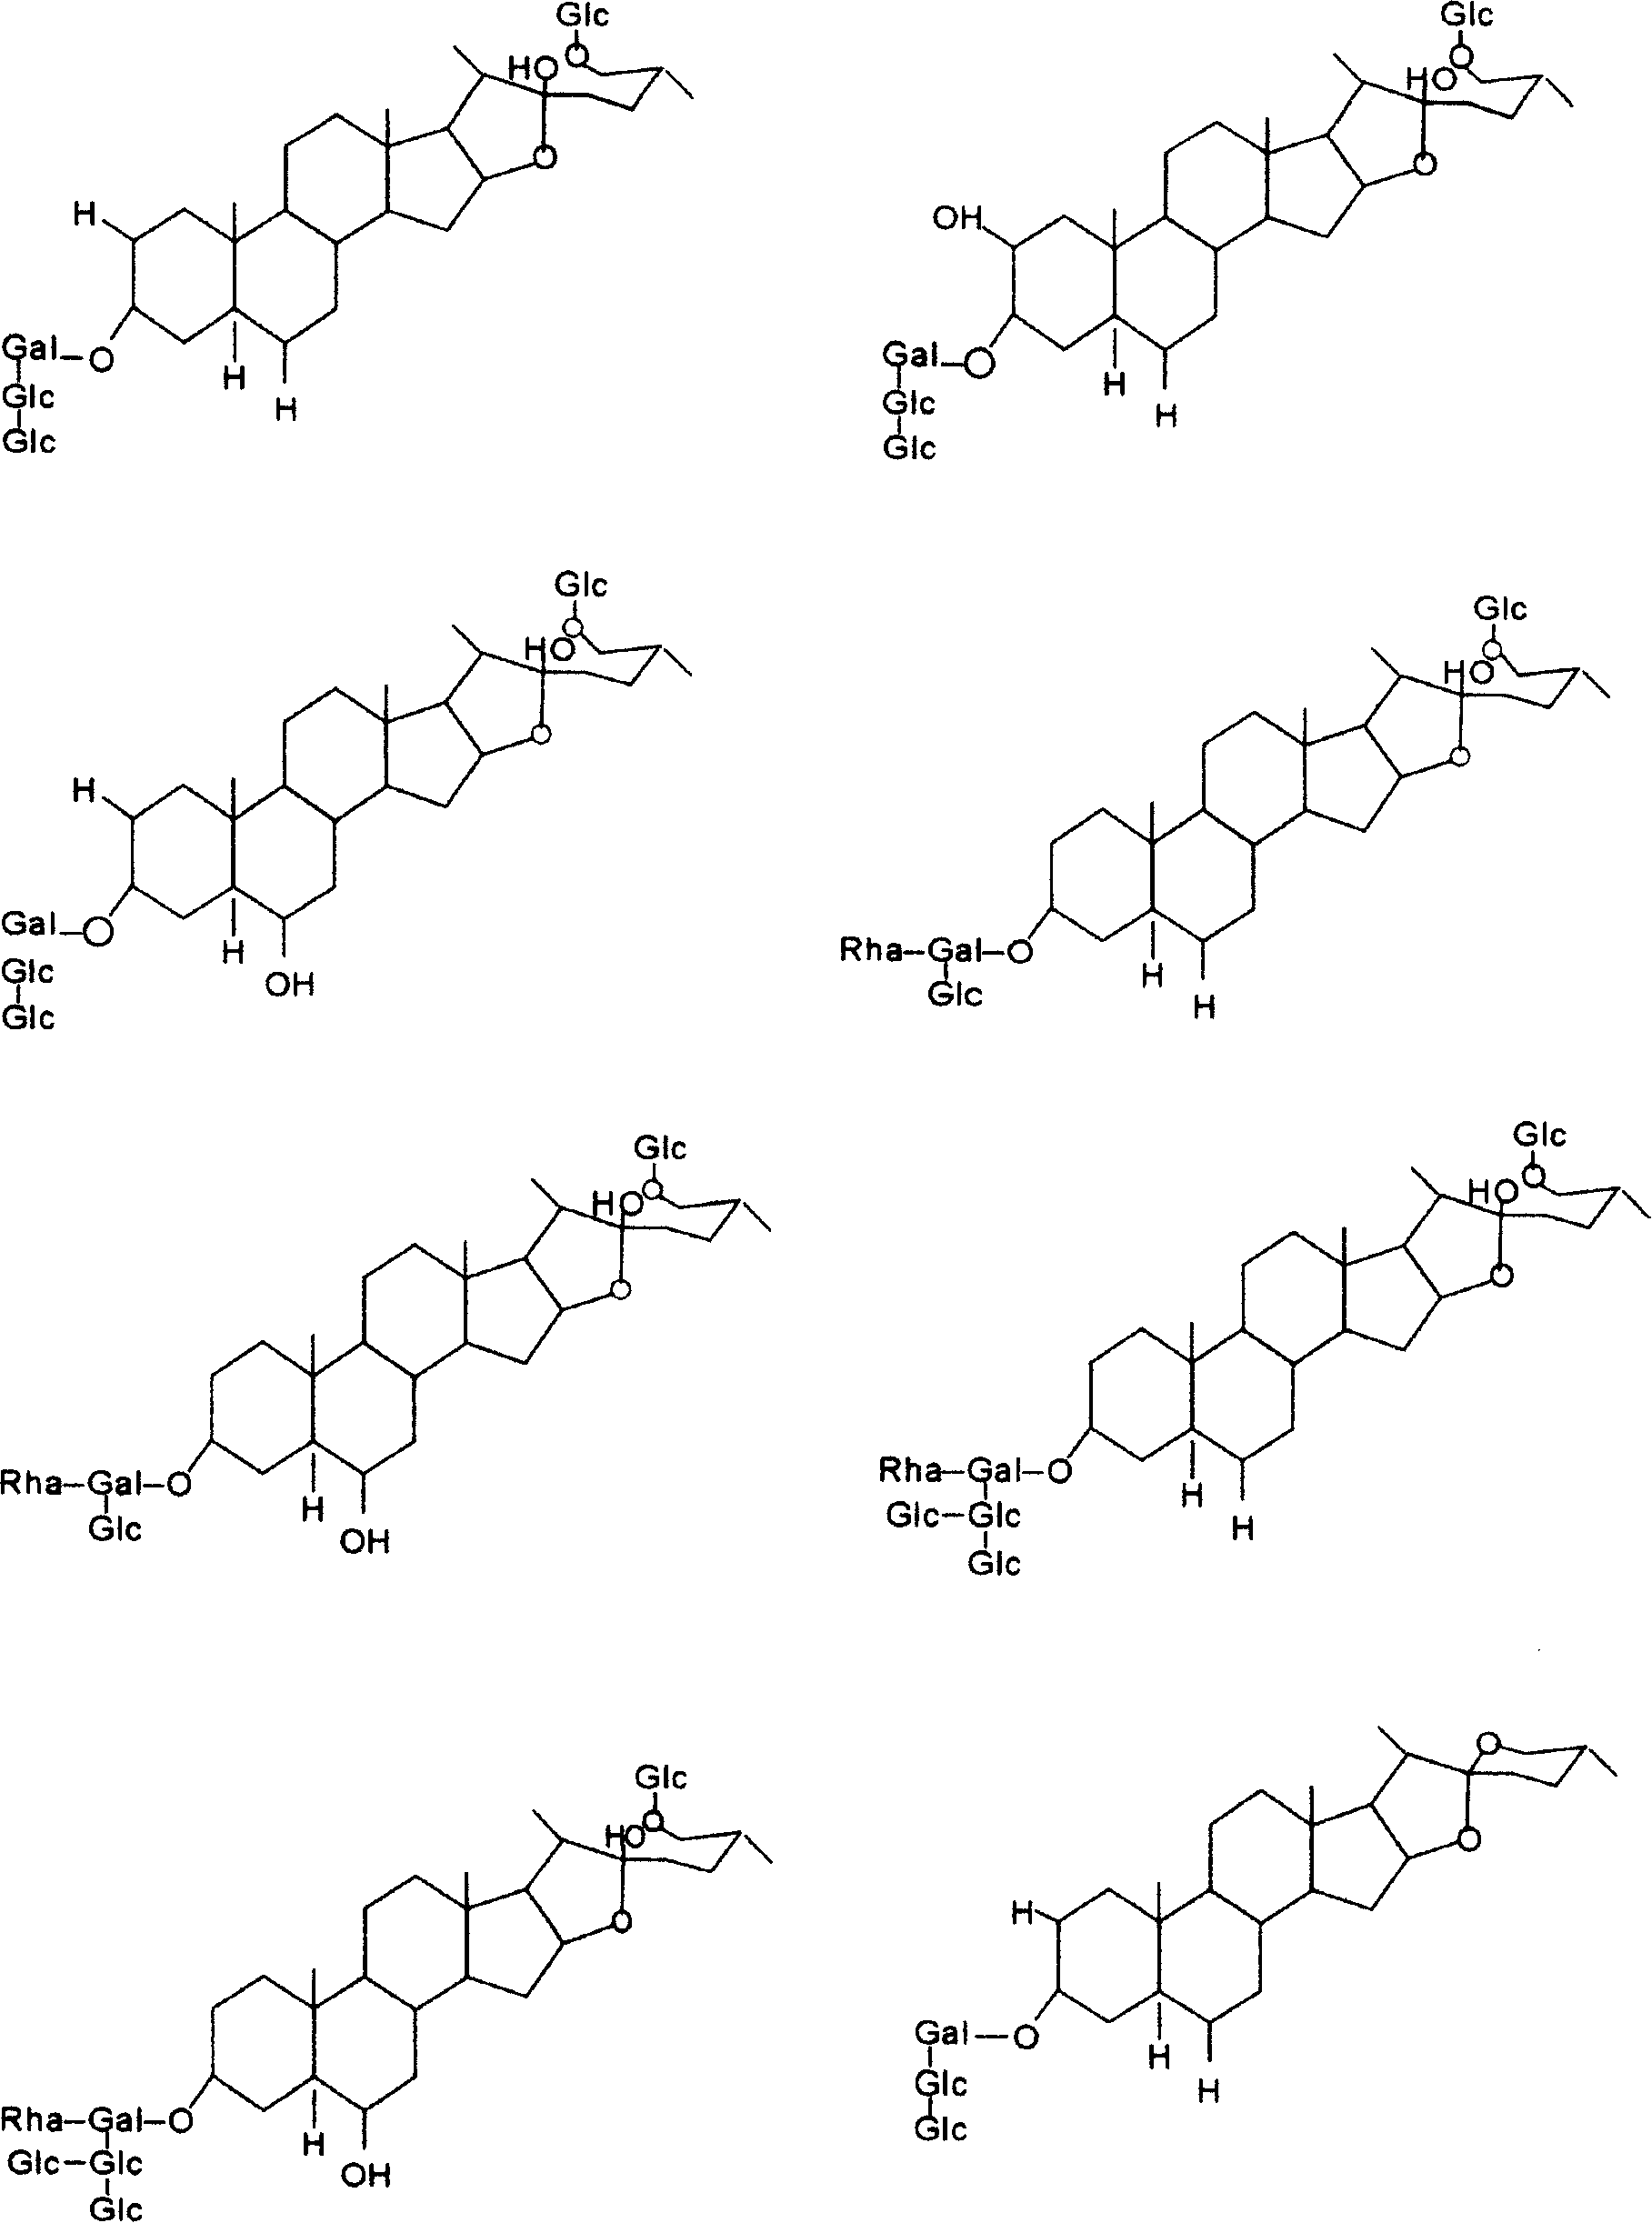 Extracting technique of garlic glucoside and garlic biological activity component compound and function